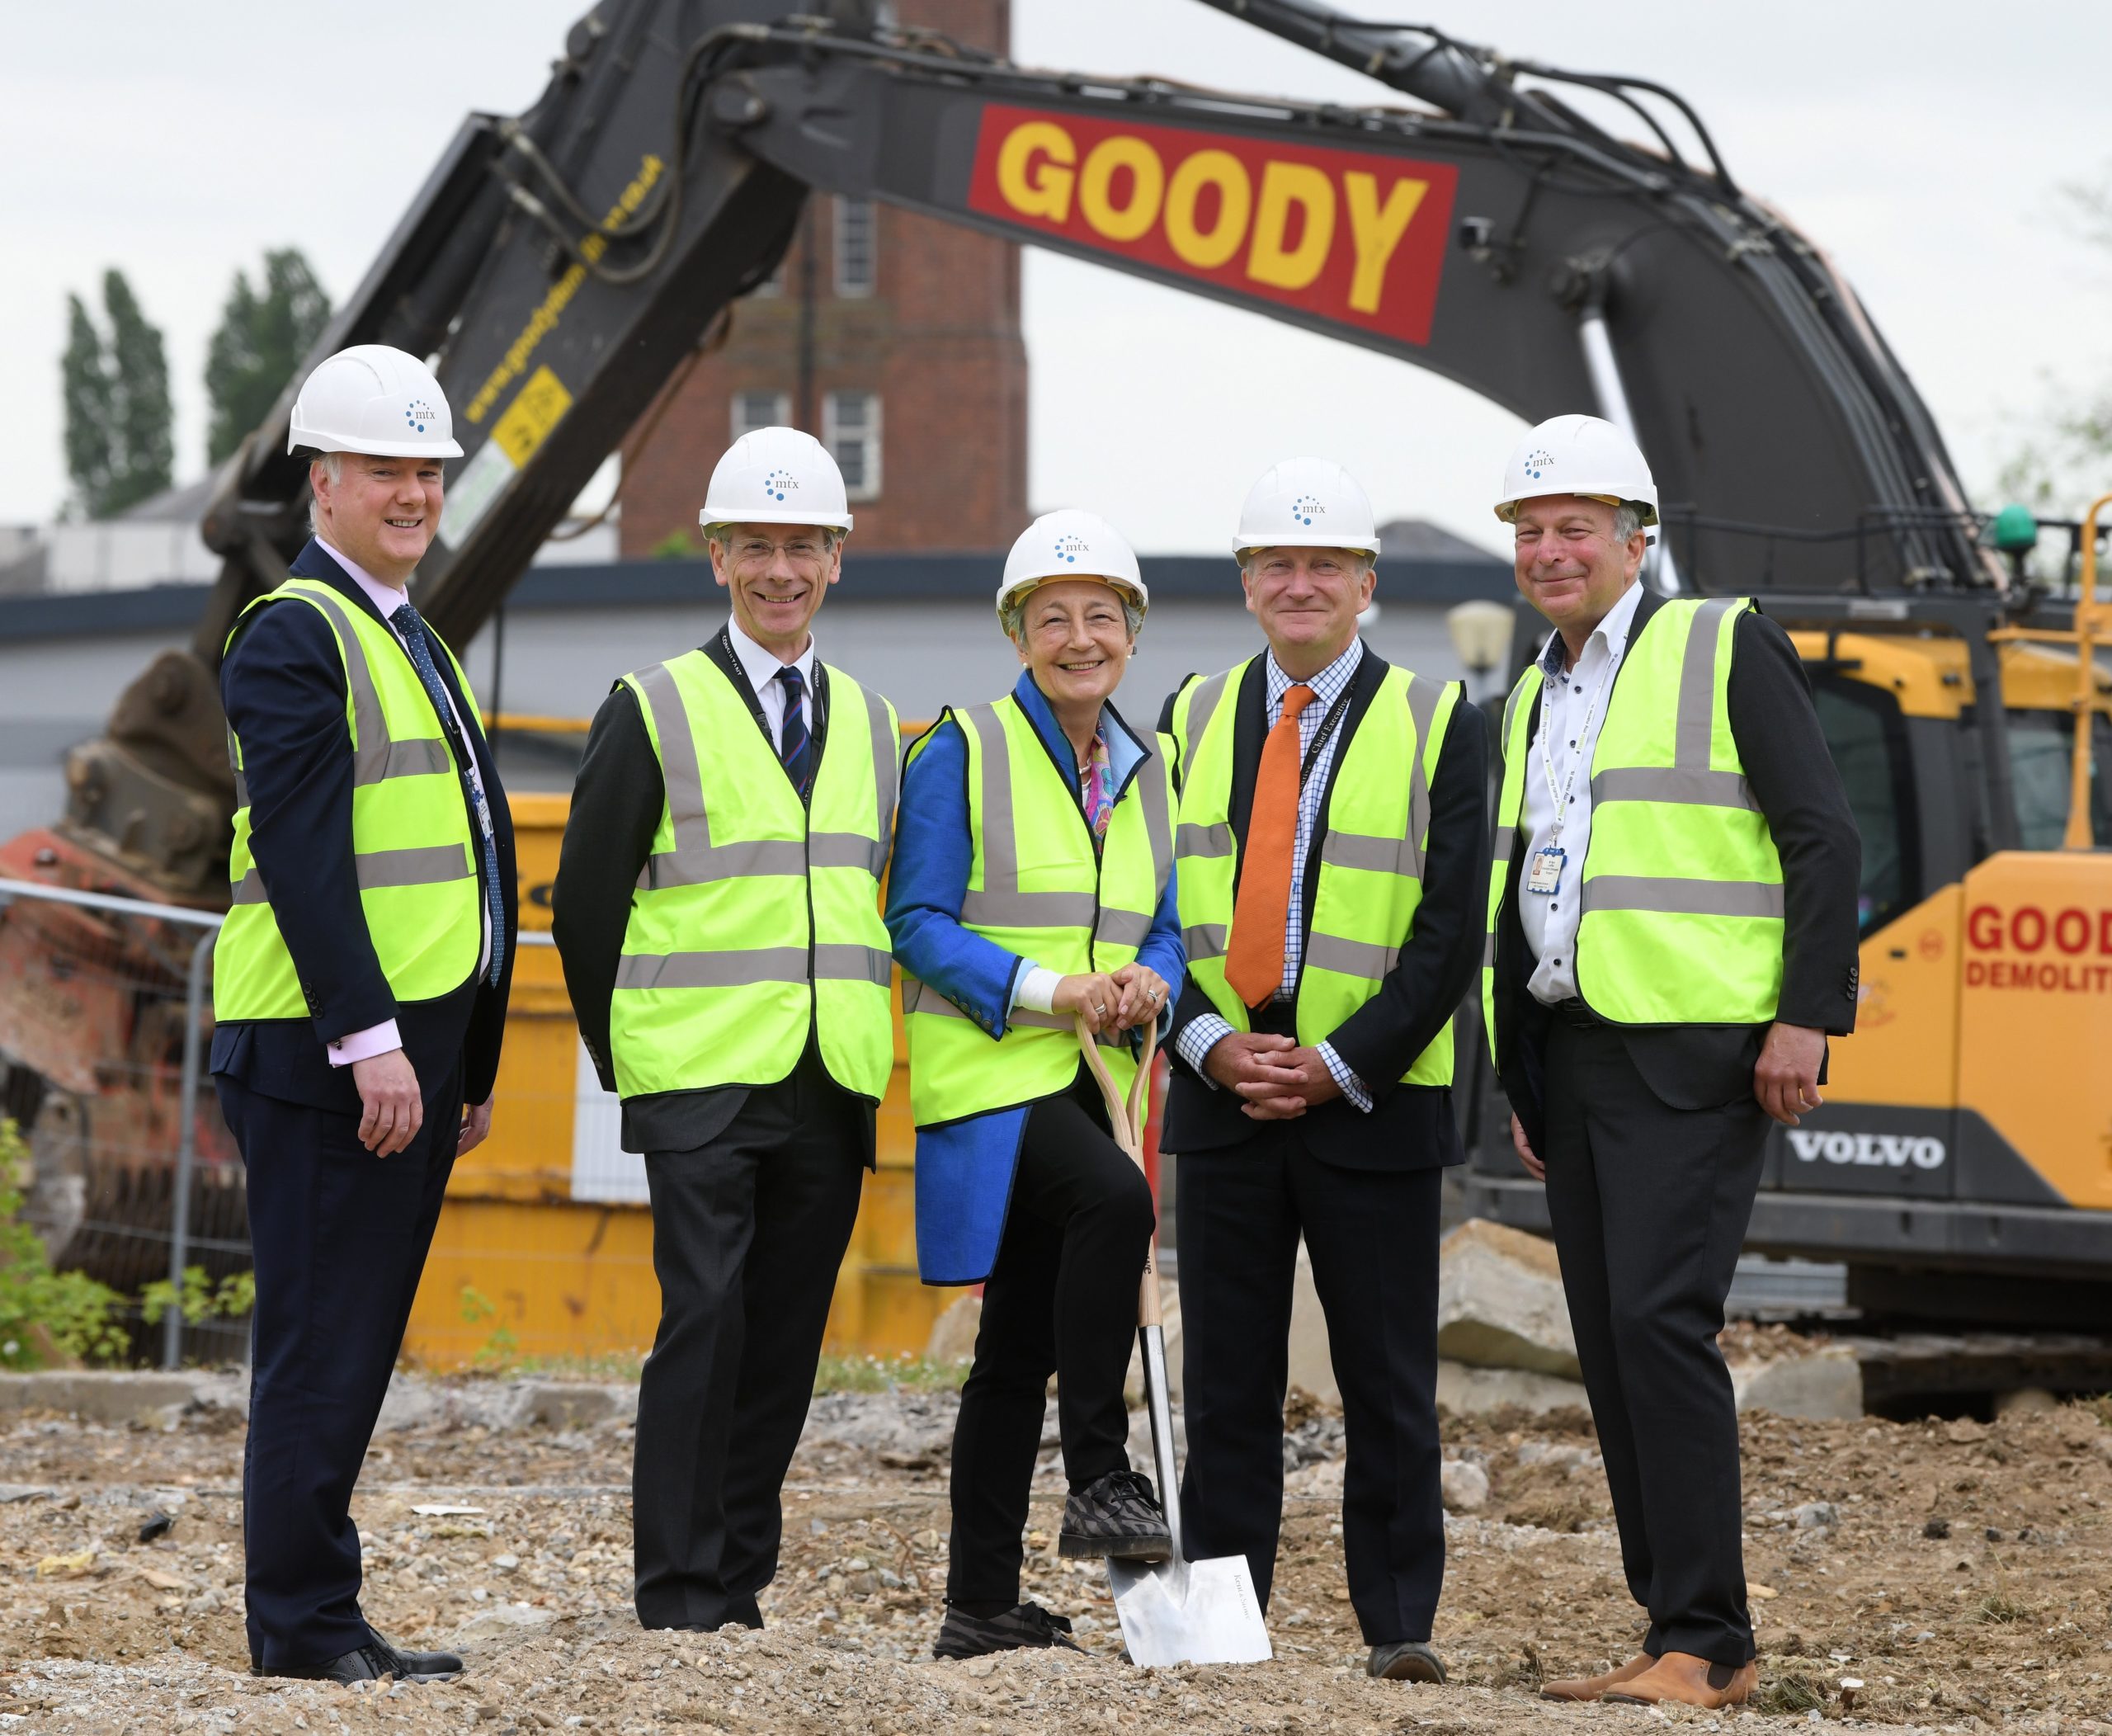 Dr Shane Gordon, Director of Strategy, Research and Innovation, Mr Mark Bowditch, Divisional Clinical Director and Orthopaedic Surgeon, Dame Clare Marx with a spade in the ground, Nick Hulme, CEO of ESNEFT, and Mr Mark Loeffler, consultant orthopaedic surgeon.